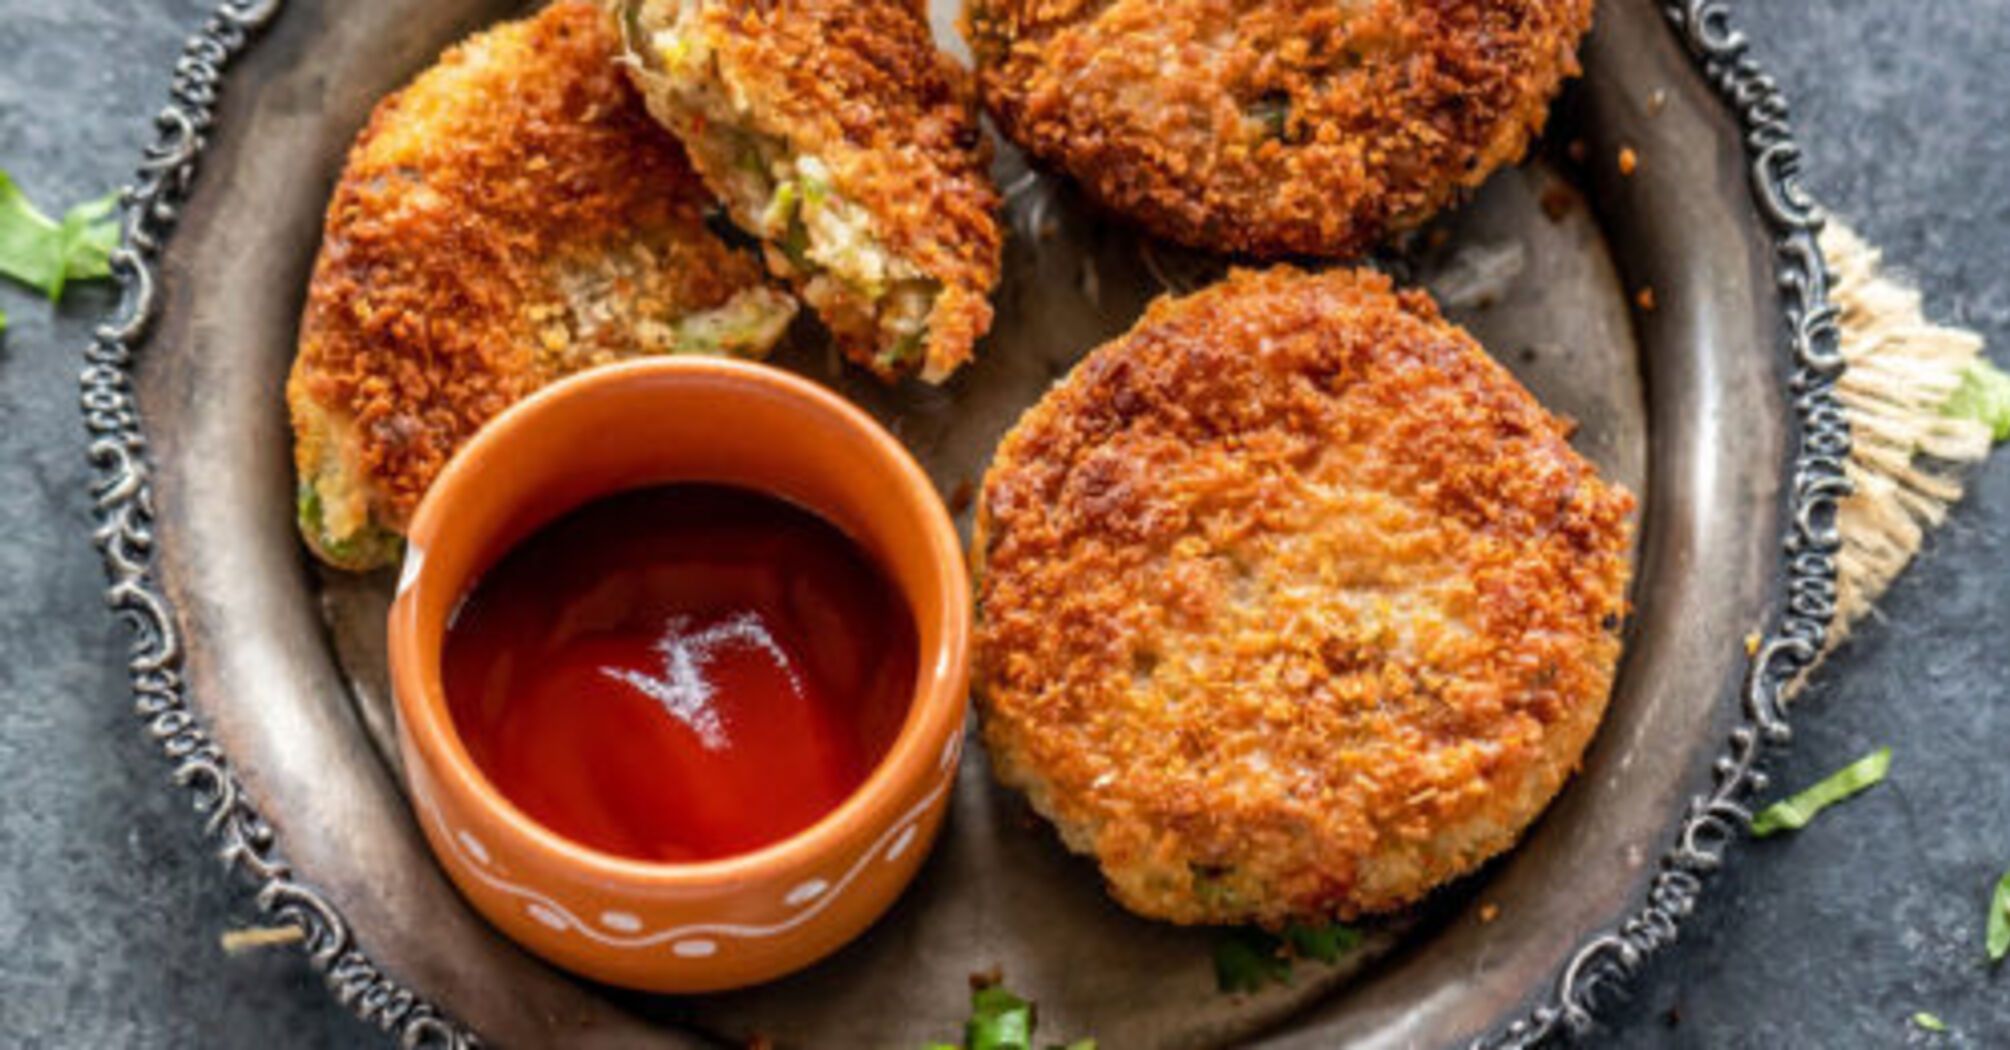 Cutlets with potatoes like pies: turn out very juicy and hearty